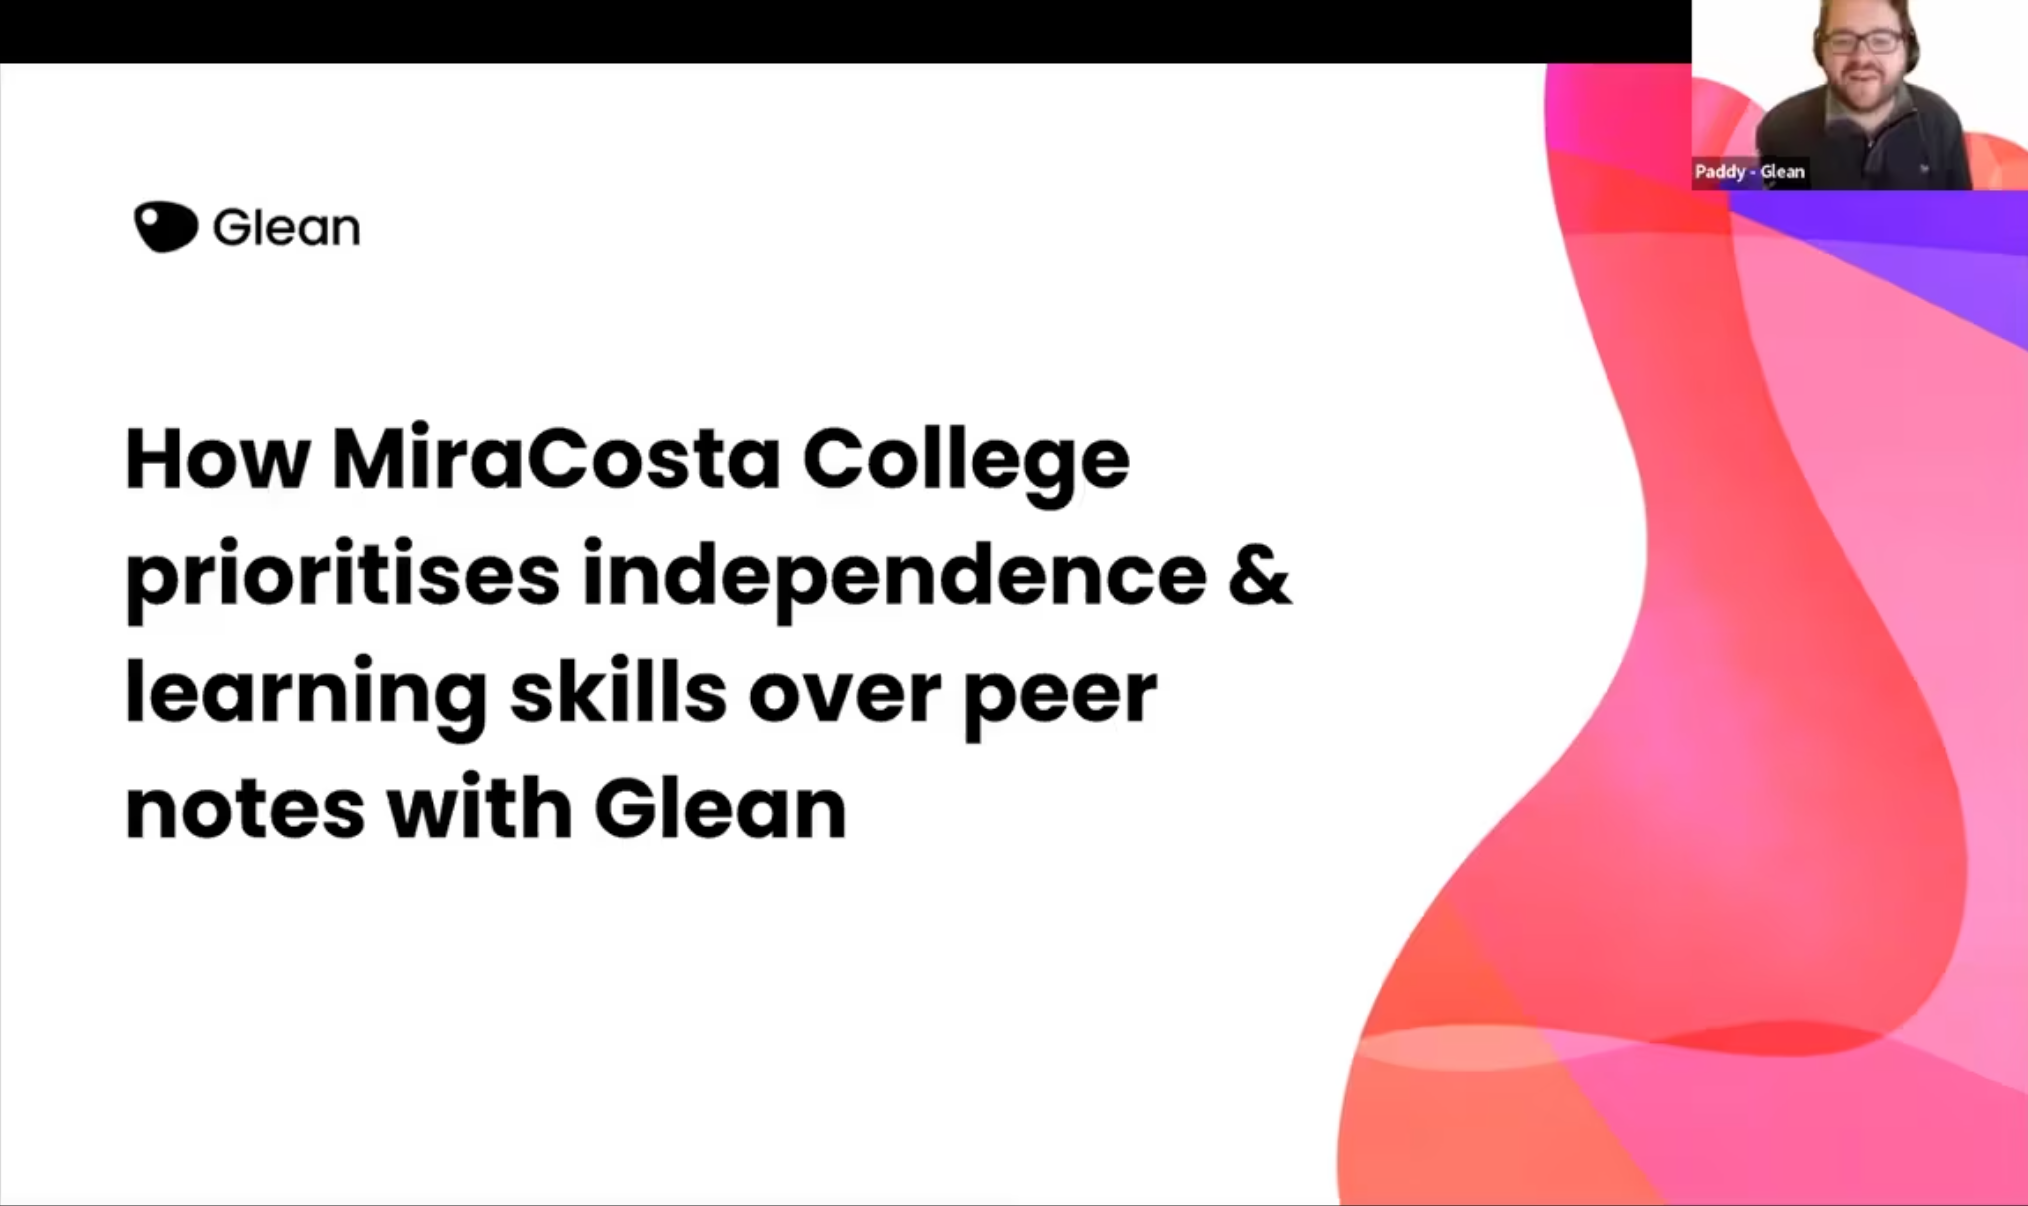 How MiraCosta College prioritises independence & learning skills over peer notes with Glean - Thumbnail